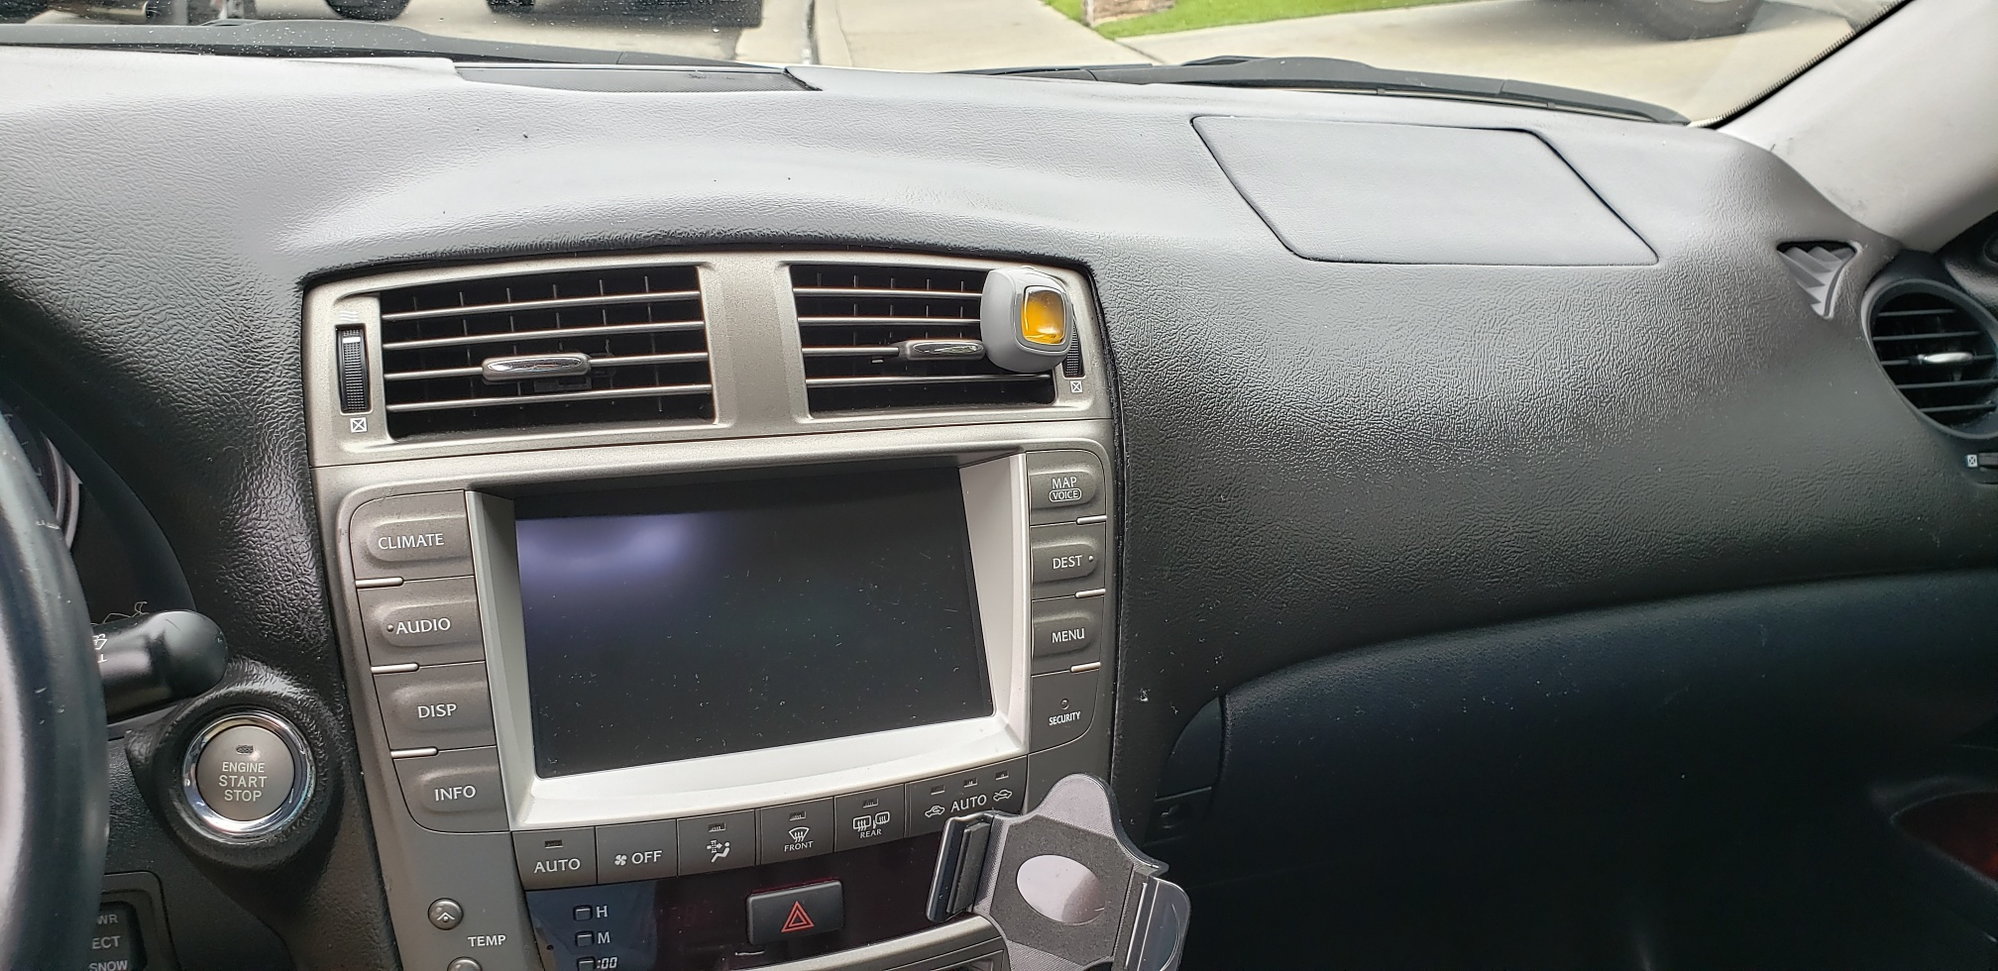 Dash Cover - Is it worth the cost!?!? - 2006 Lexus IS250 